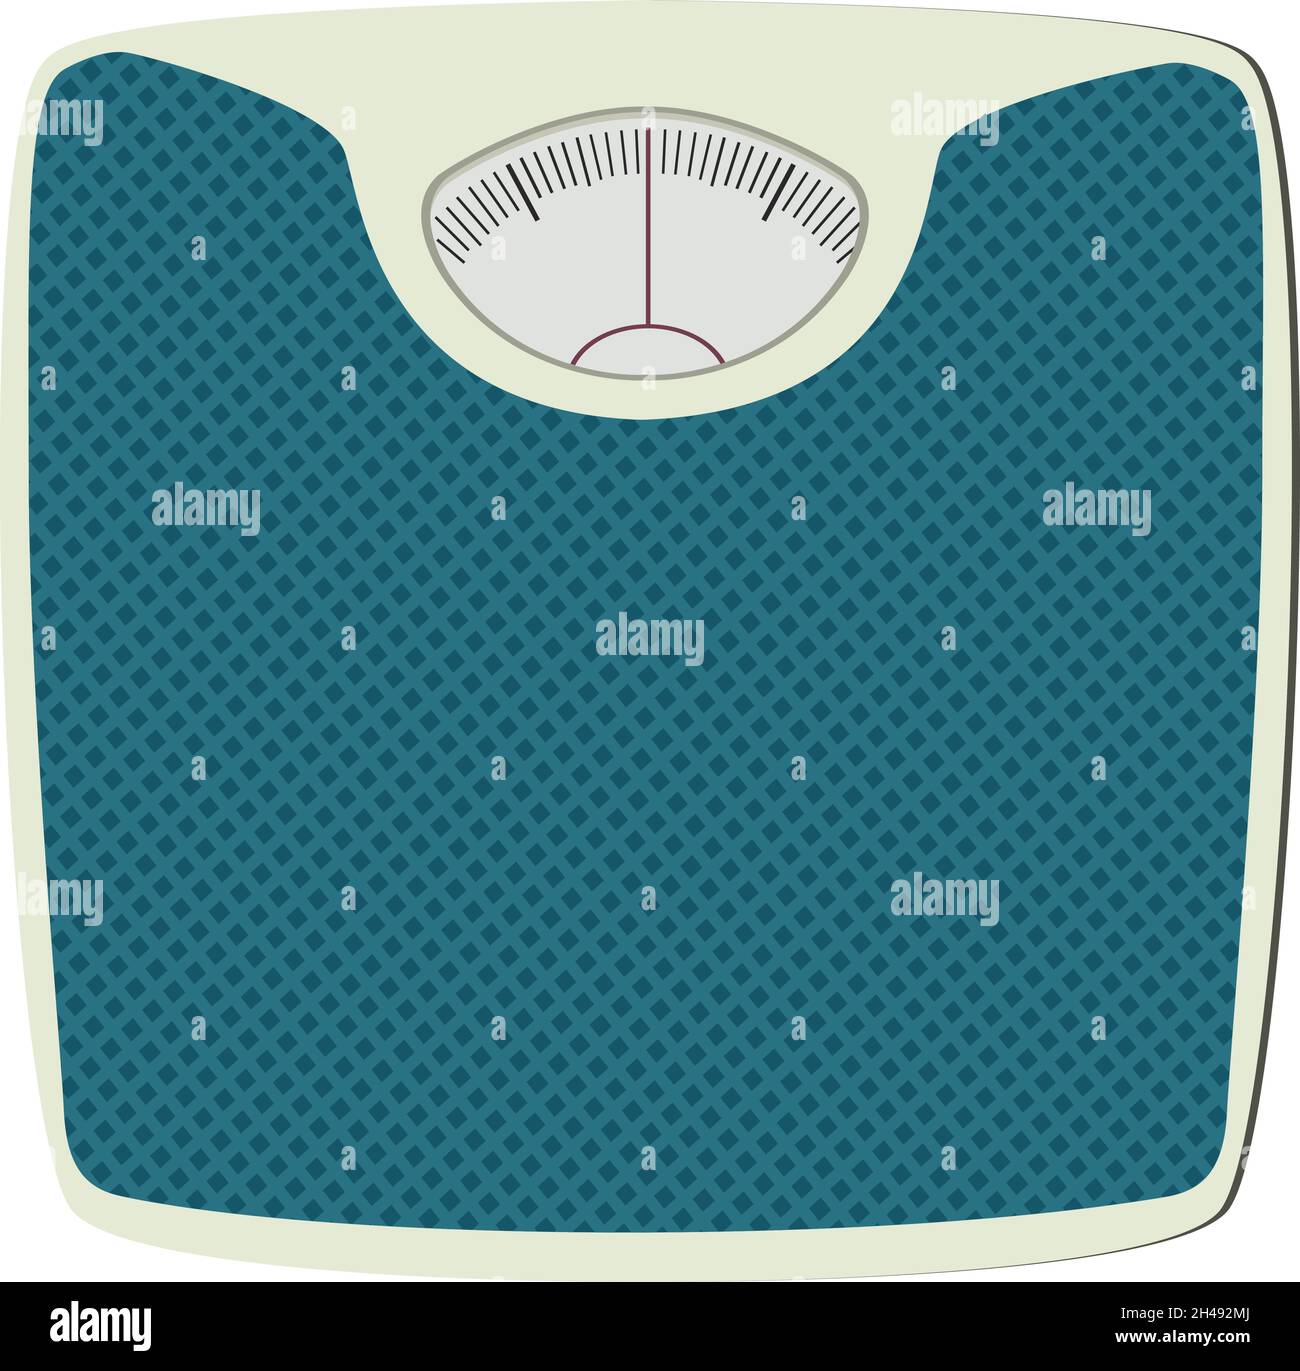 Weight scales, illustration, vector on a white background. Stock Vector